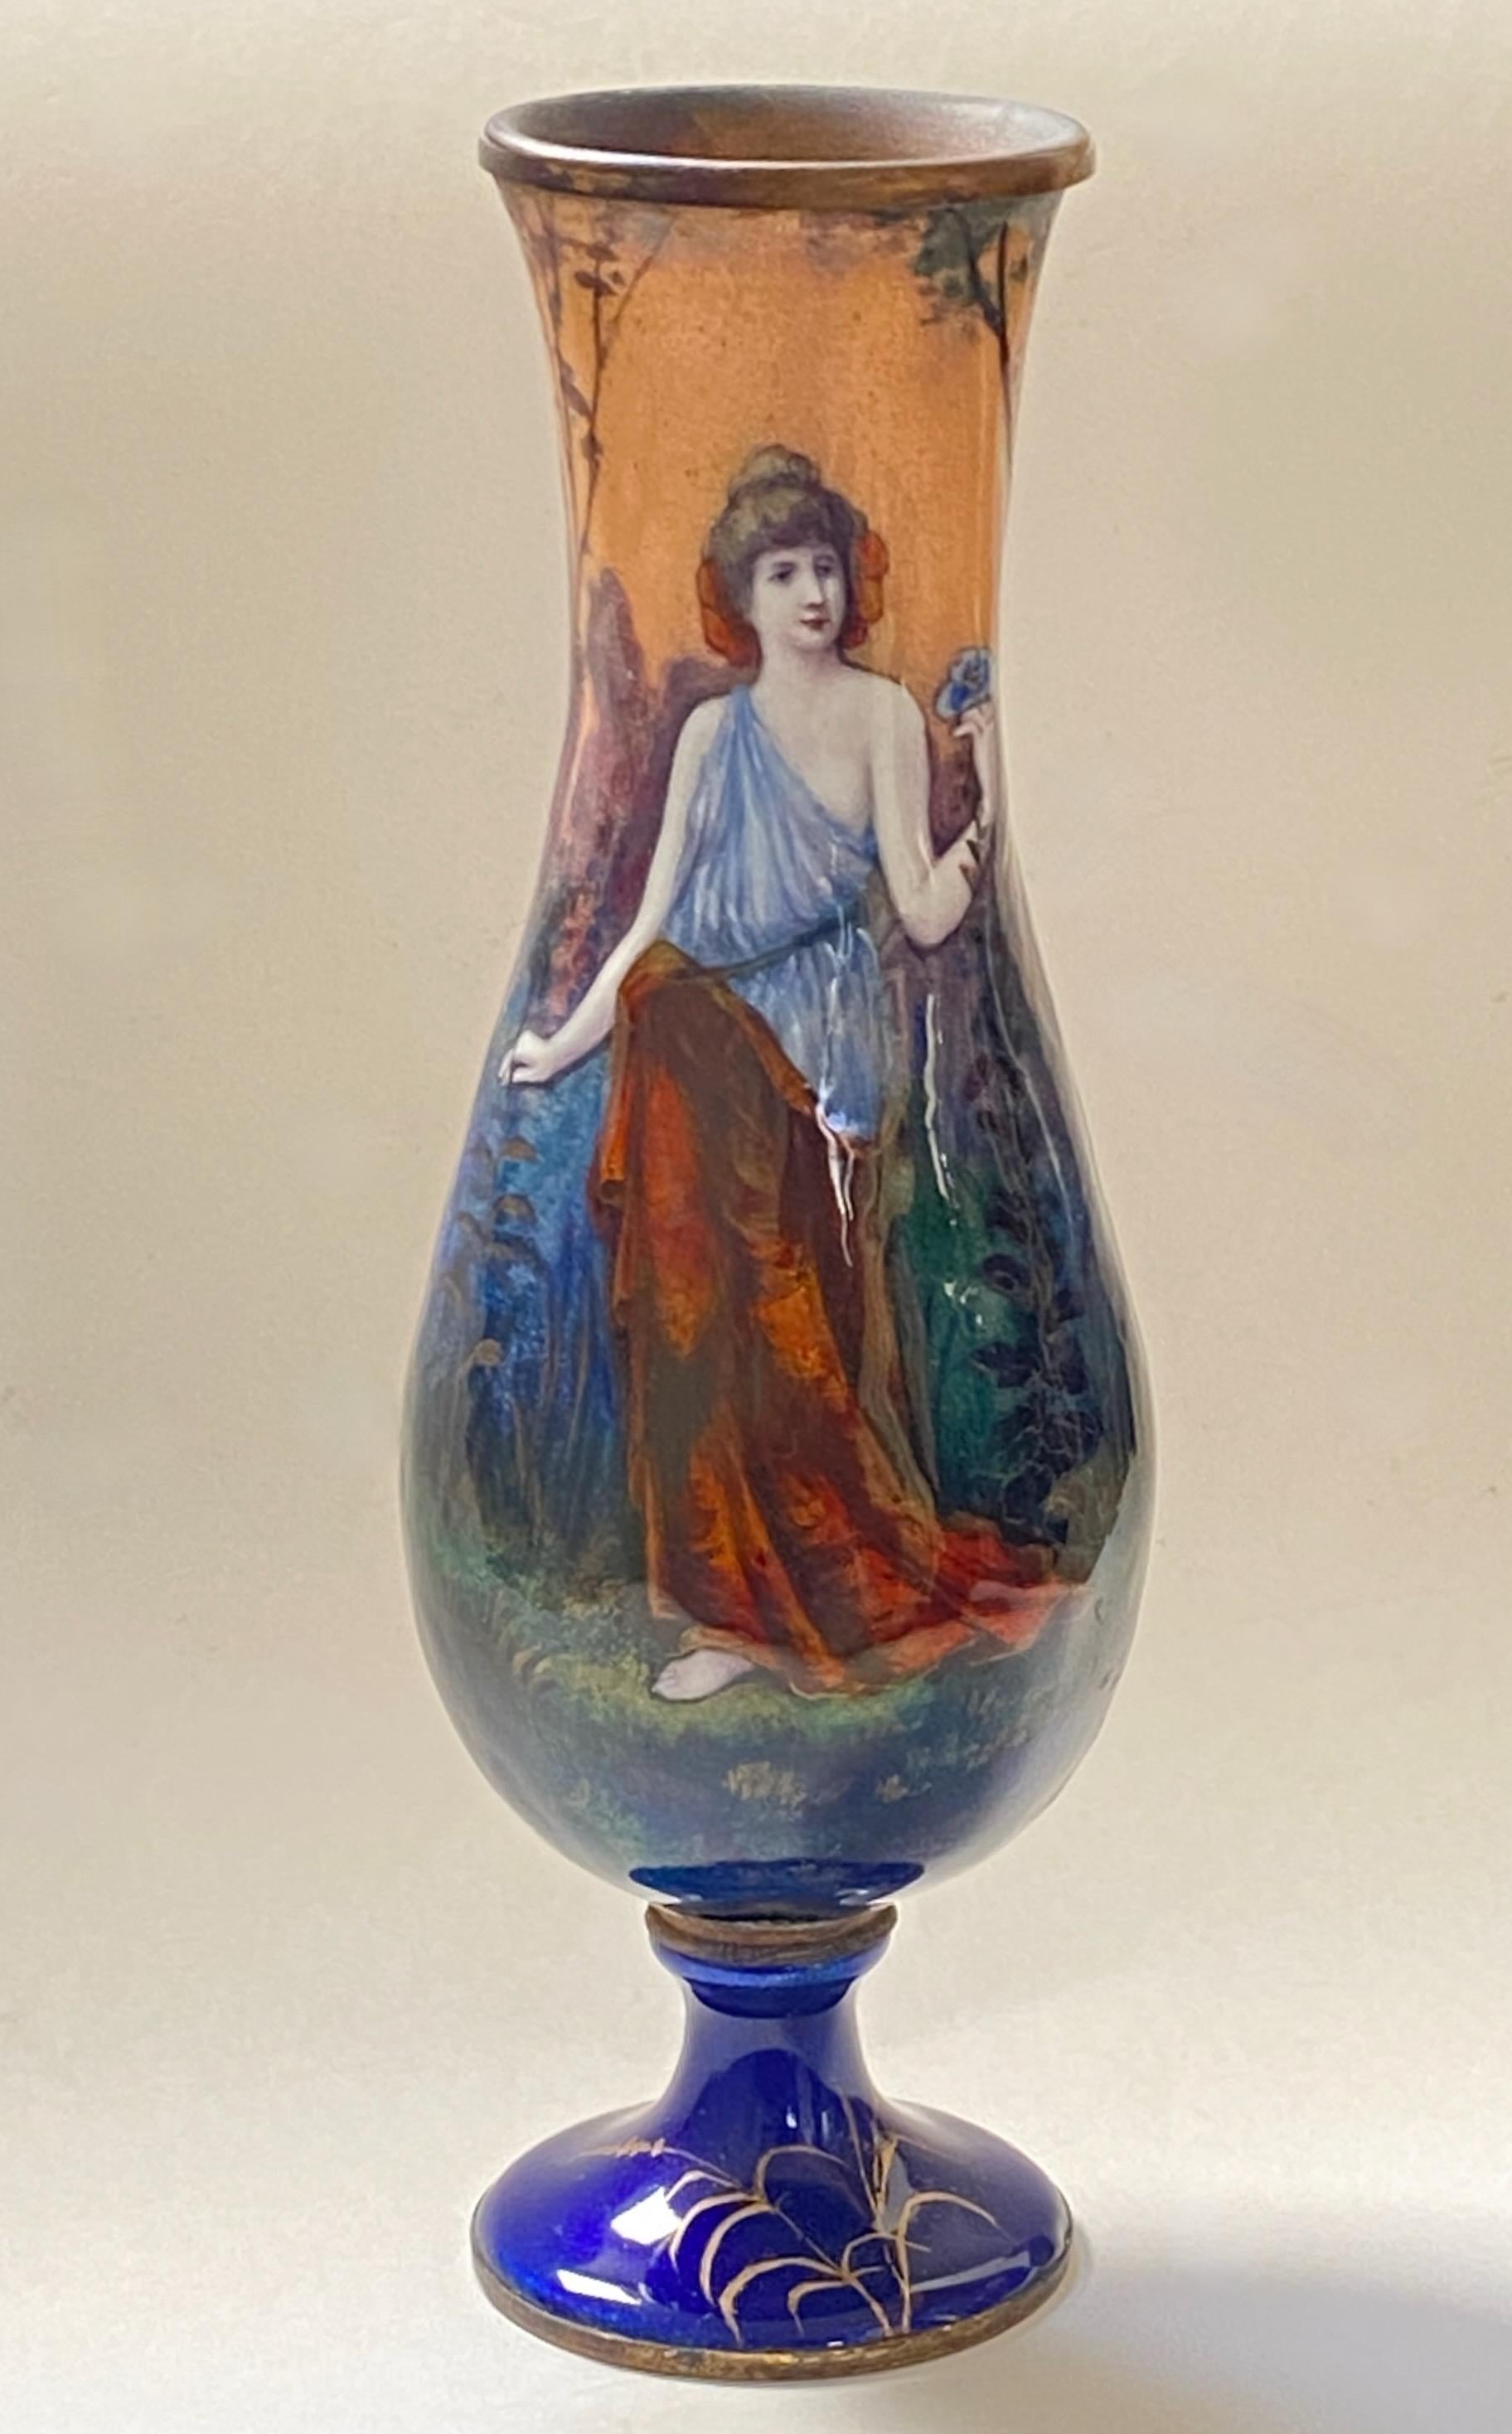 A small antique baluster shape portrait vase. Enamel on copper with a hand painted young woman and romantic scenic background. Unsigned.
French, second half 19th century. In excellent condition with no damage.
  